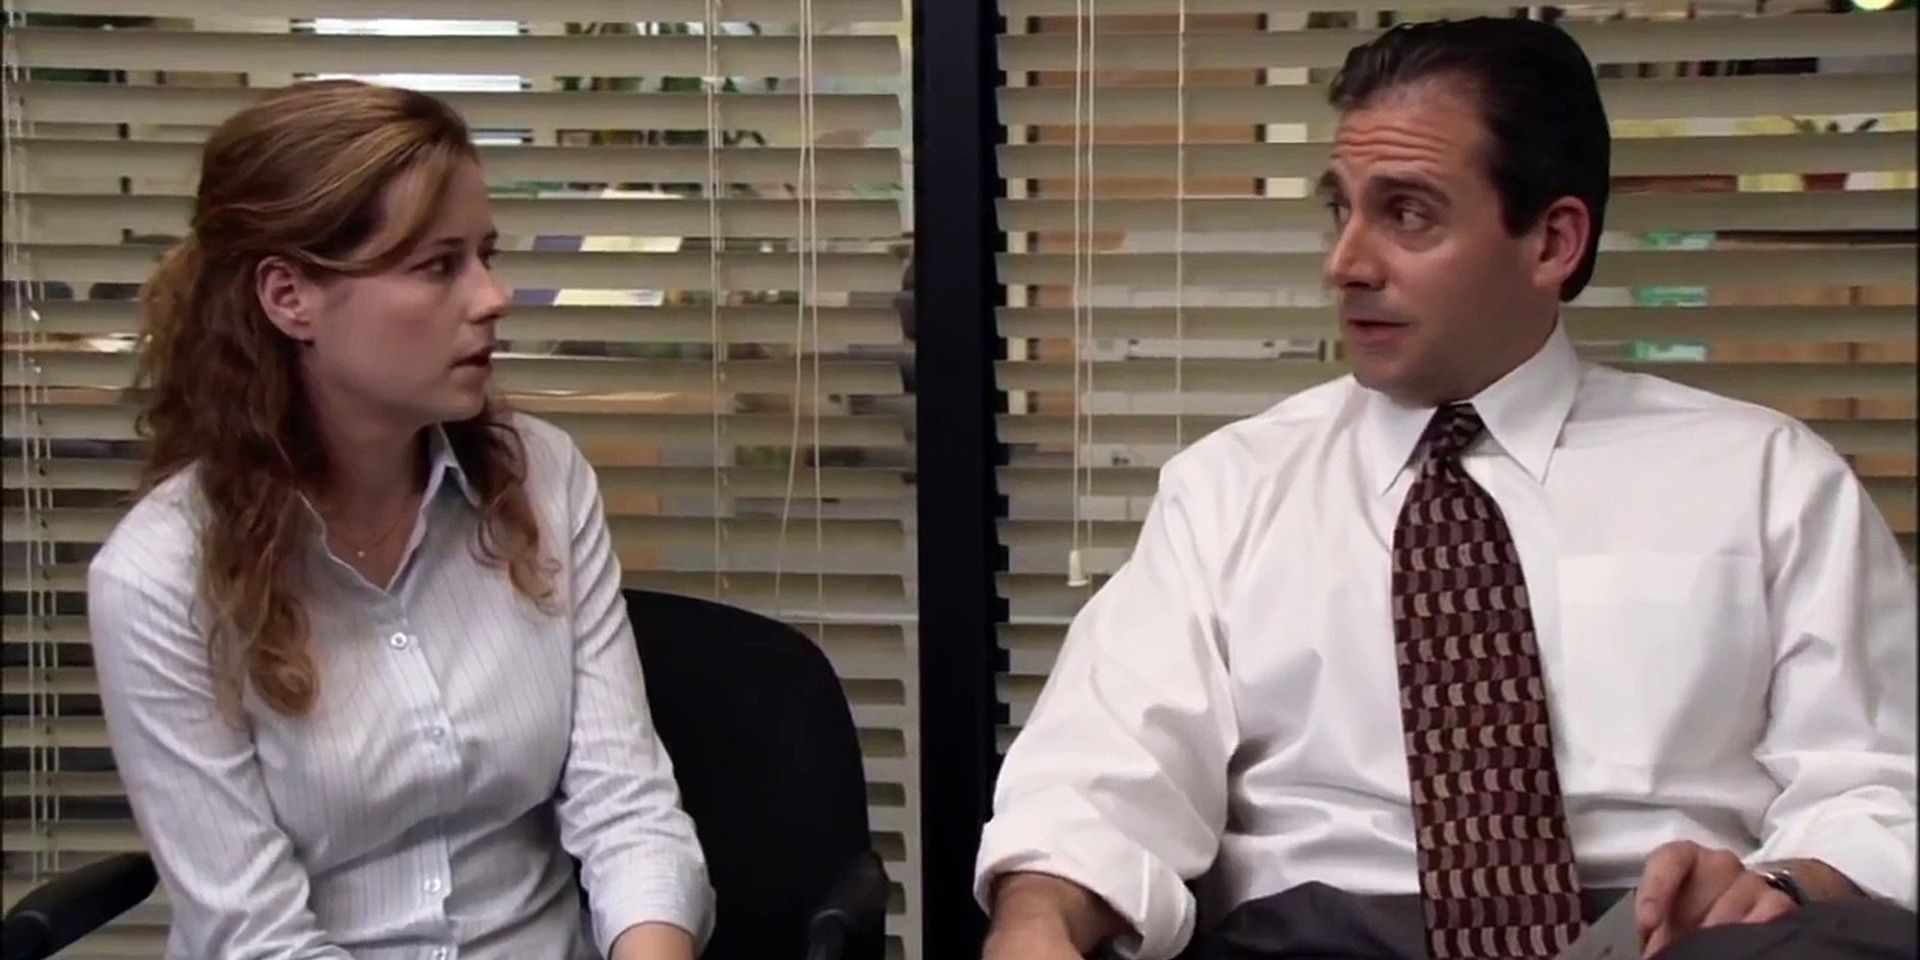 The Office 5 Times Jim and Pam Were Clearly Soulmates (& 5 Times They Were Awful Together)